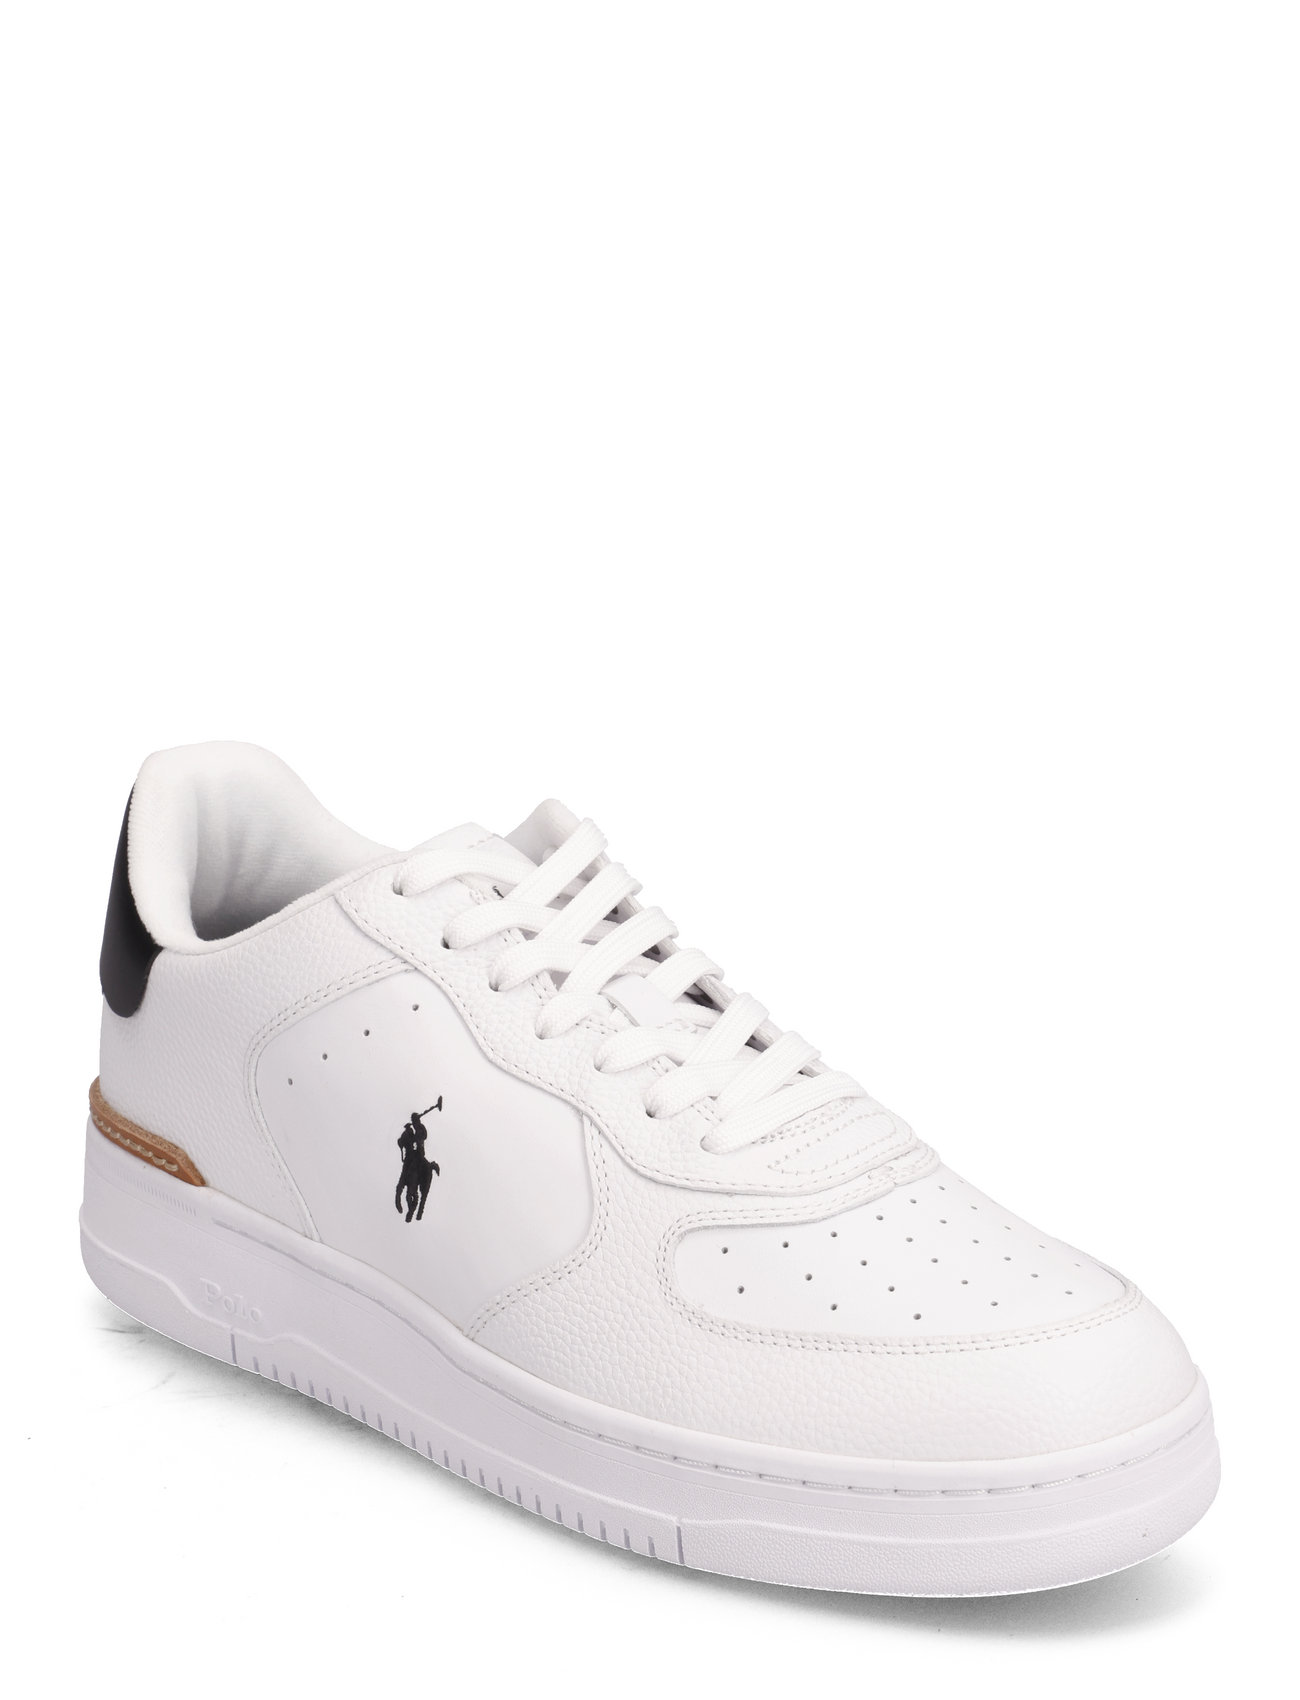 Polo Ralph Lauren Masters Court Leather Sneaker - Low Tops - Boozt.com